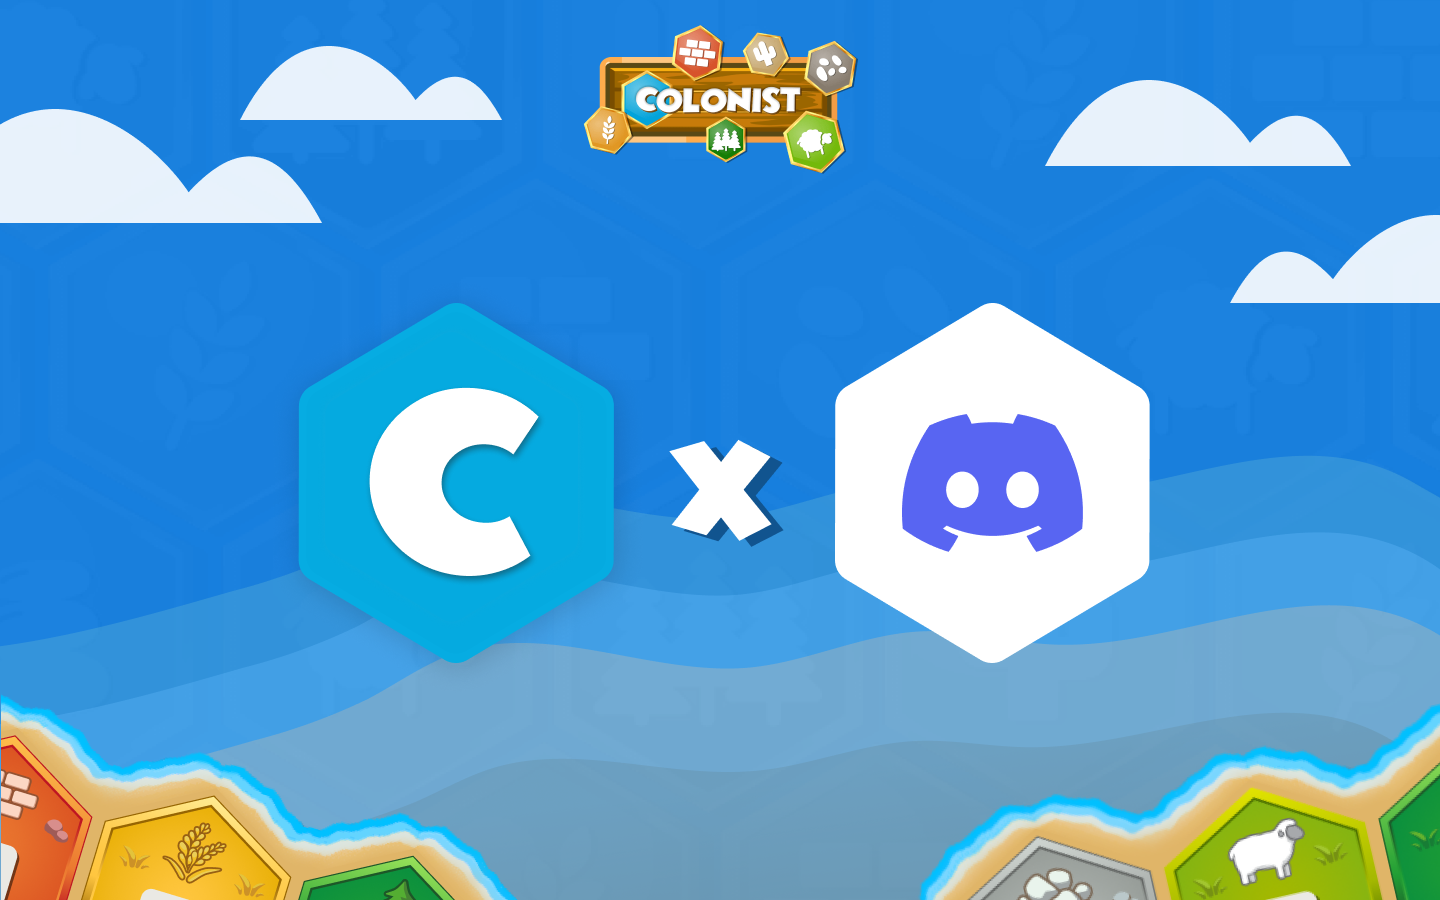 Brawl Stars - Have you subscribed to Brawl Stars Discord server